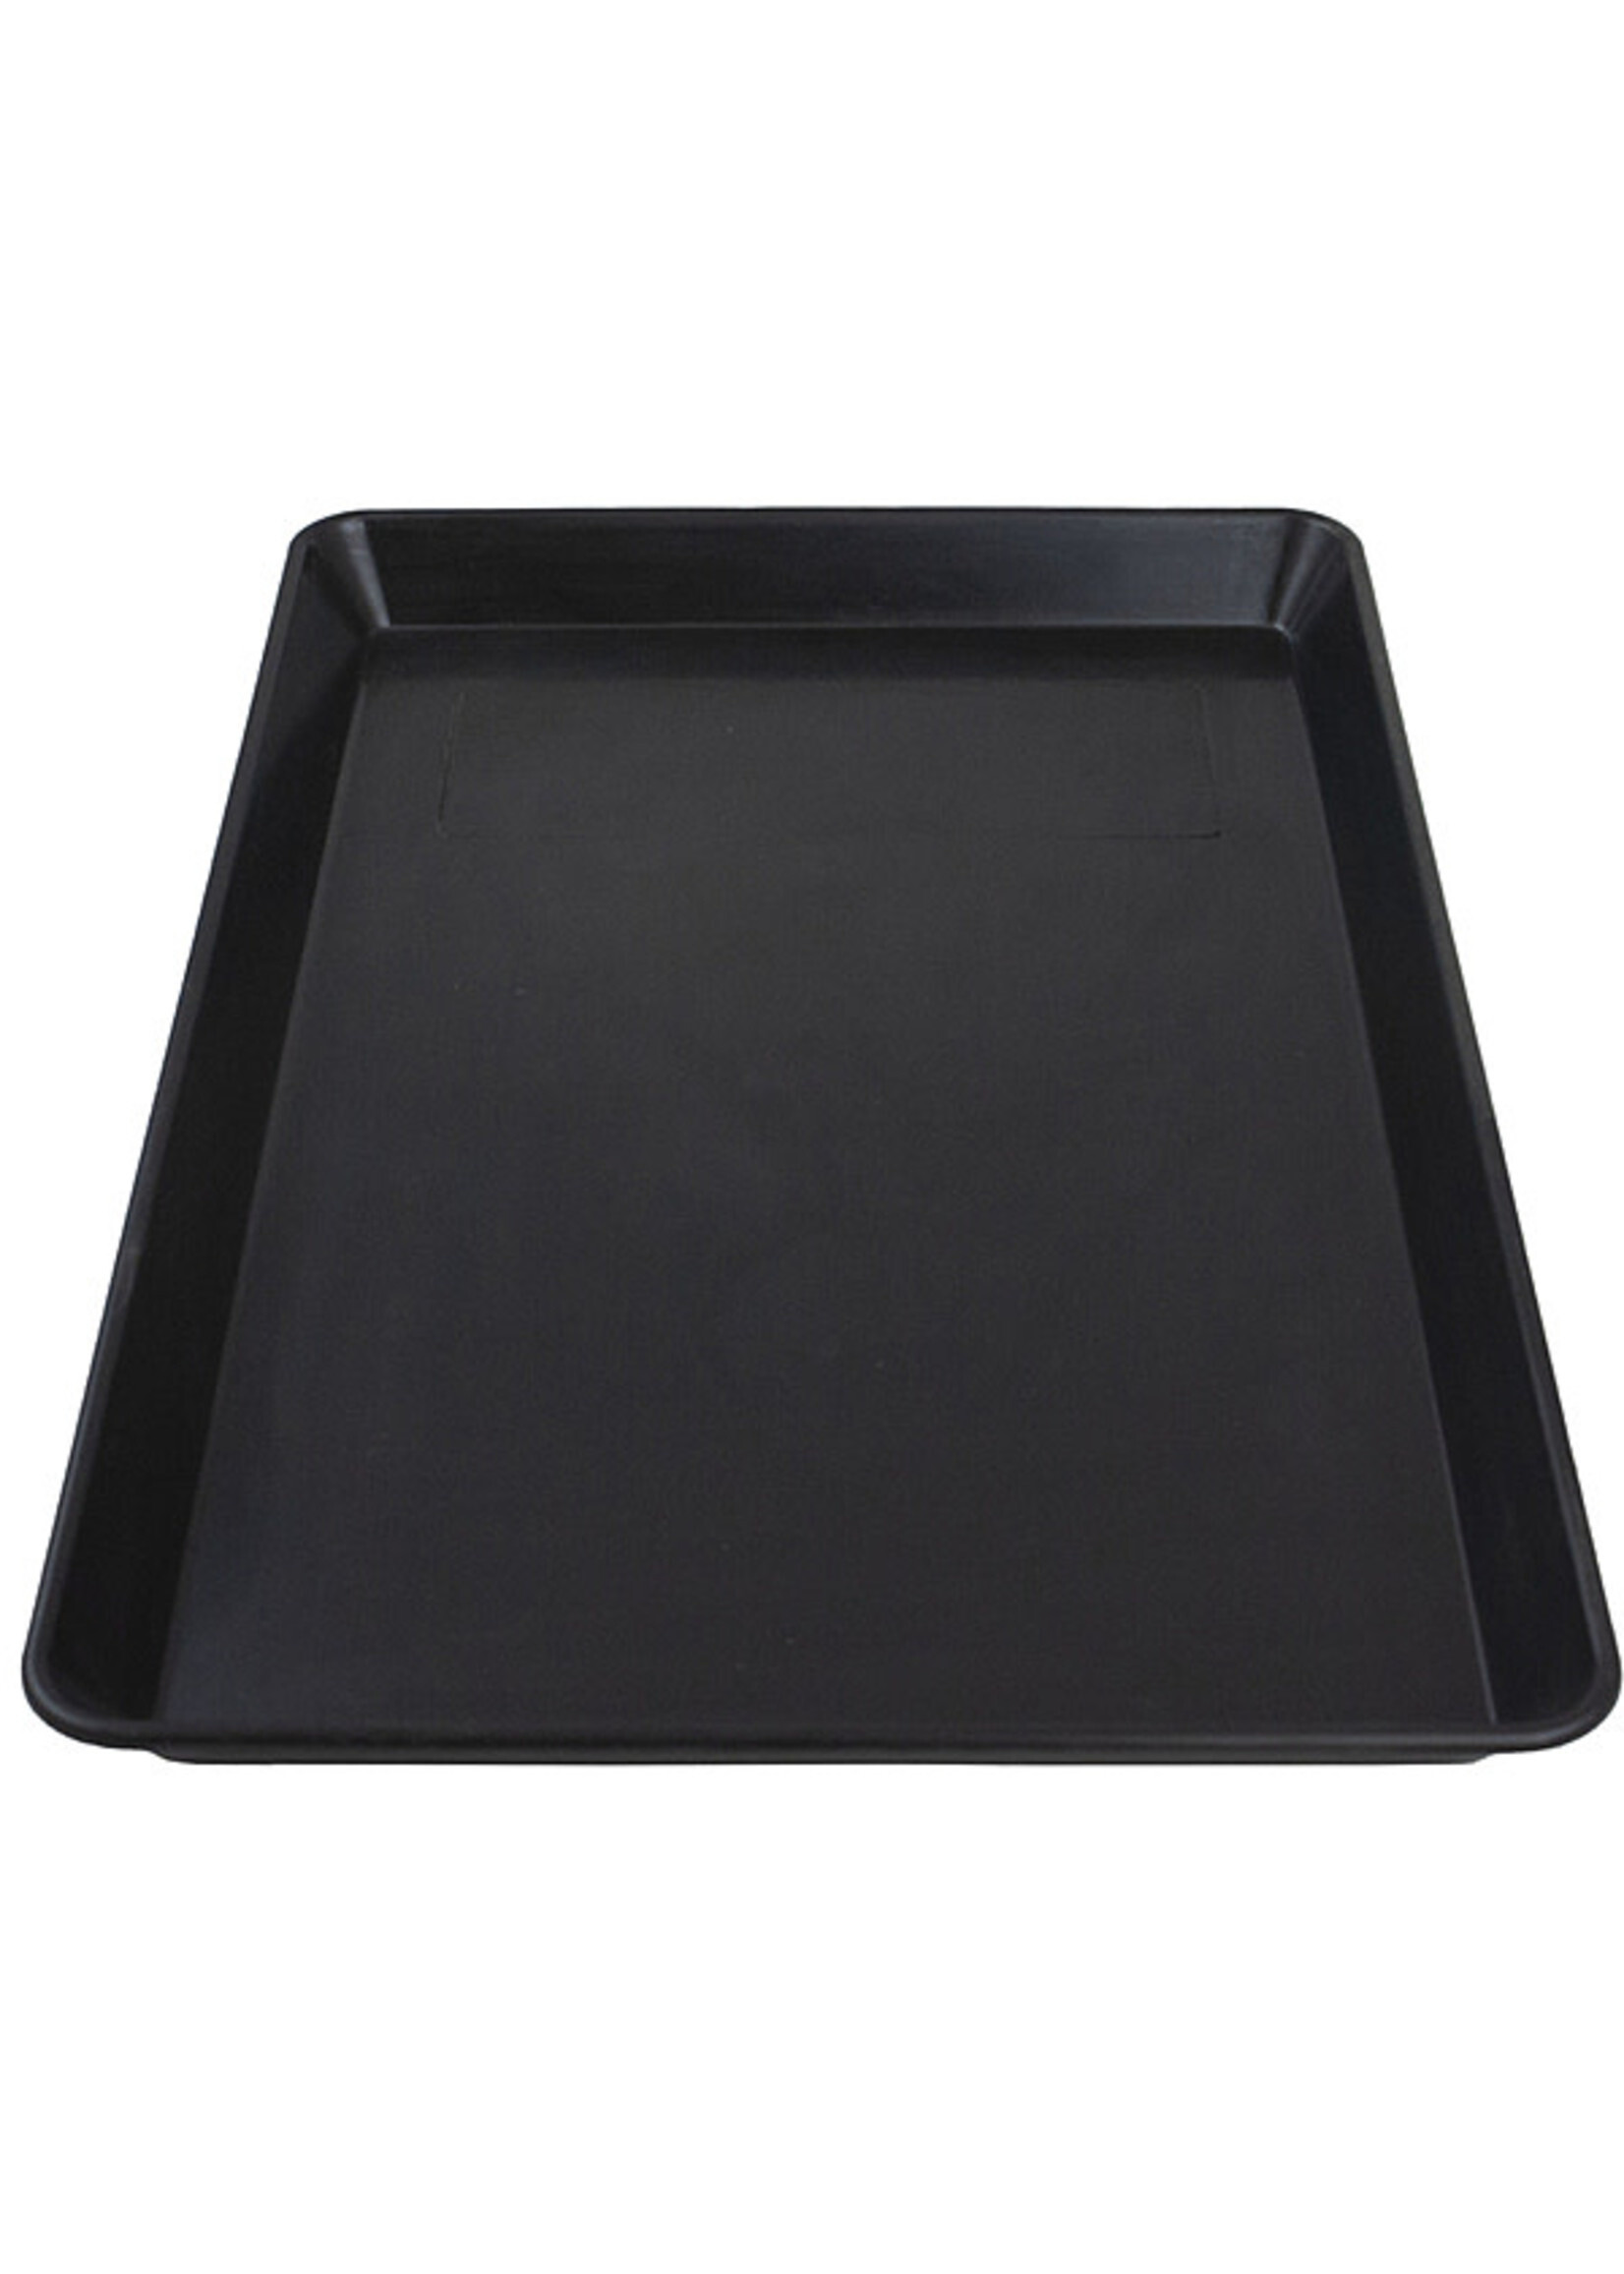 Unleashed Plastic Tray 17.5 x 11.5"